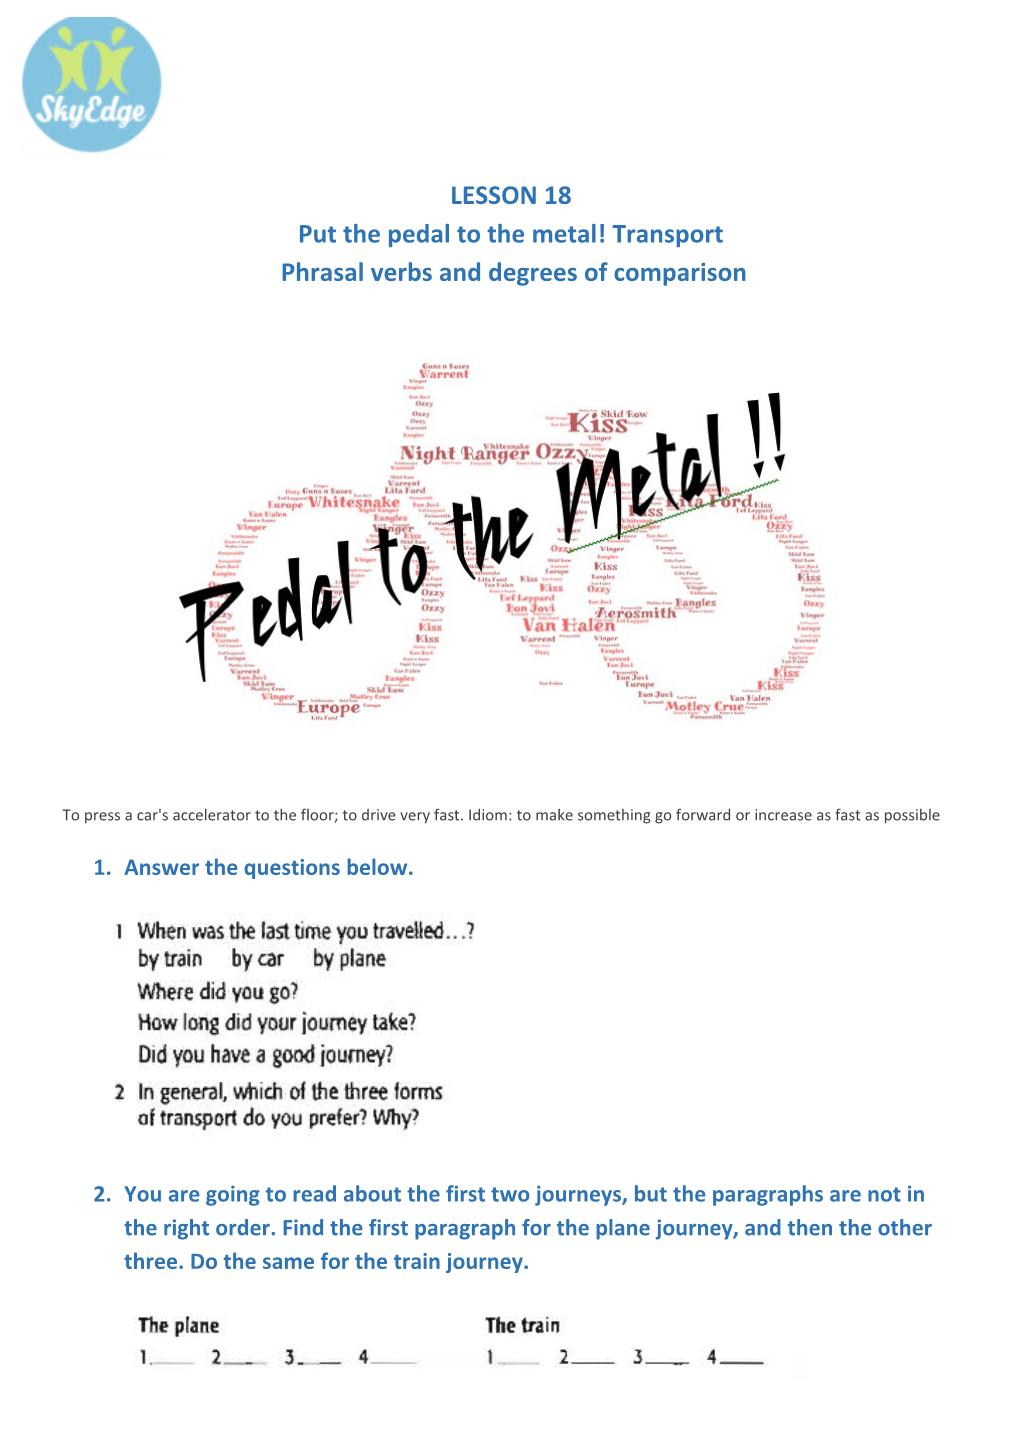 Put the Pedal to the Metal! Transport